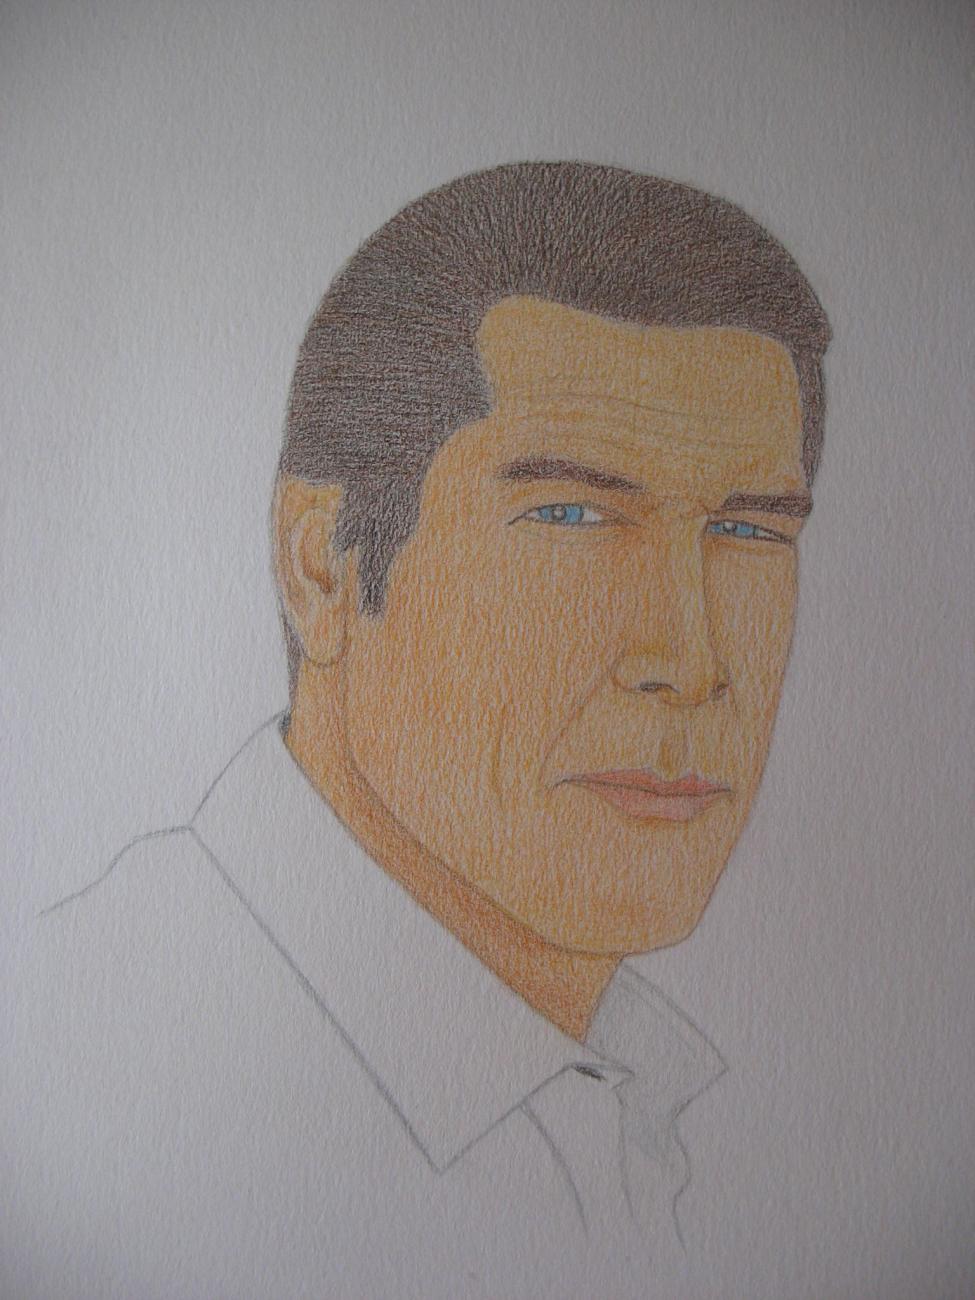 15 - Roger Moore